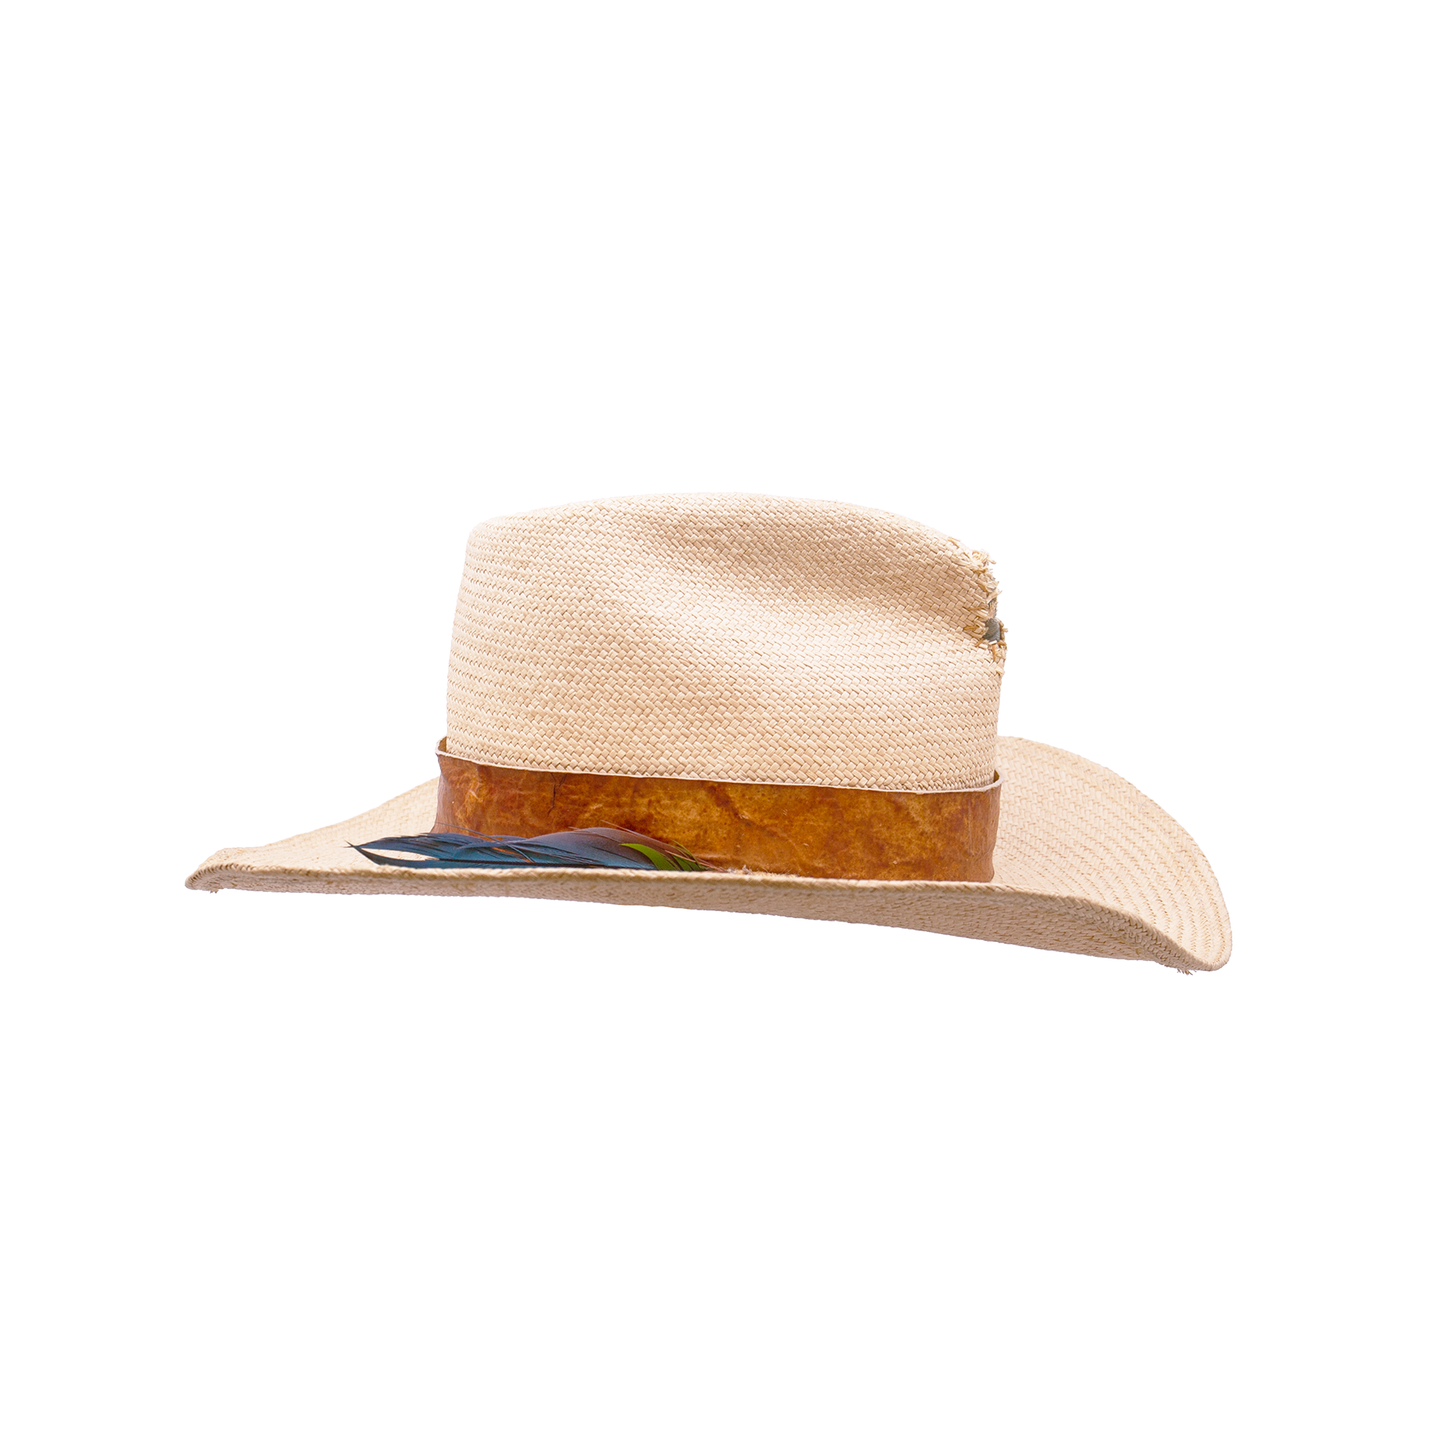 100% Straw Hat in Natural  Ecuadorian Straw Crown  1 1/2" Reishi™ band MycoWorks Fine Mycelium™ leather alternative   Molt harvested parrot feather with silver and gold nuggets  NF fabric patched center pinch  NF western flanged brim  Woven in Ecuador  Made in California